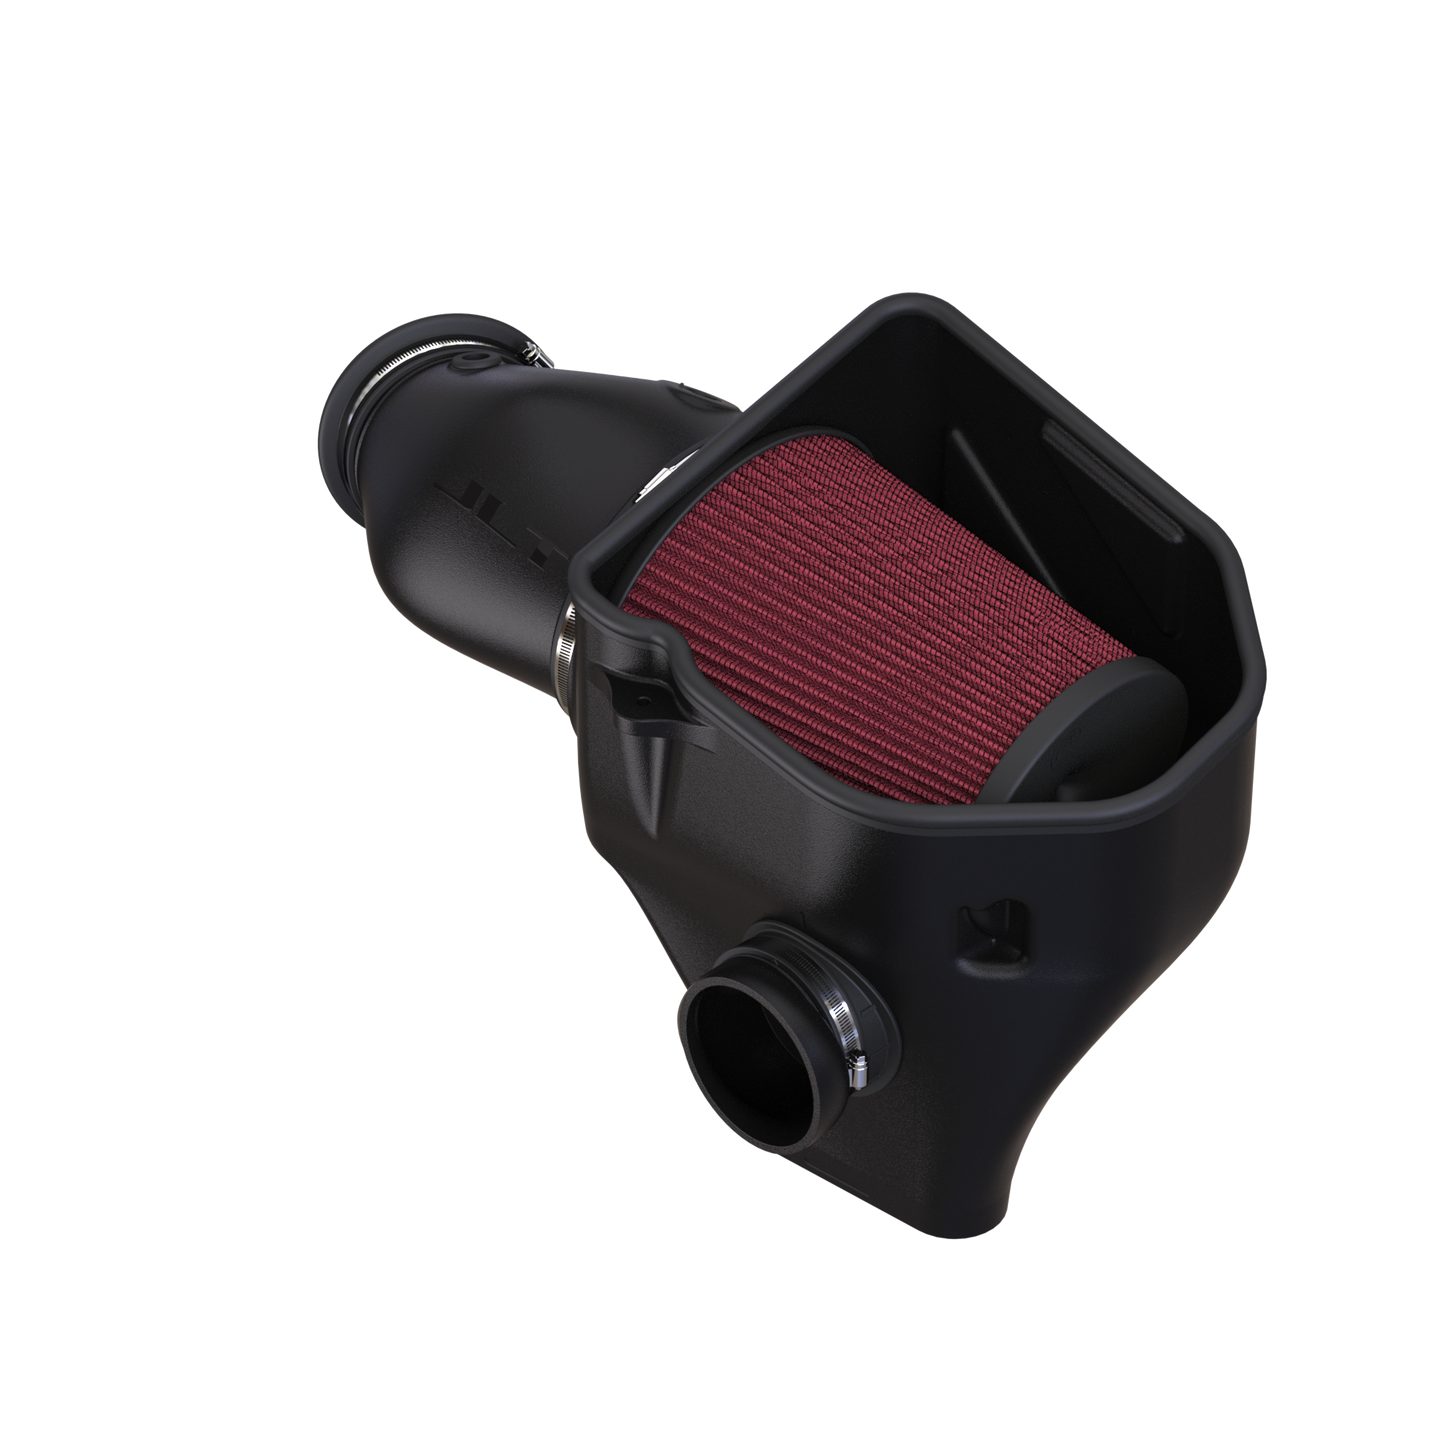  JLT Cold Air Intake for 2017-2020 Charger Hellcat & 2017-2018 Challenger Hellcat (Widebody Models Only)